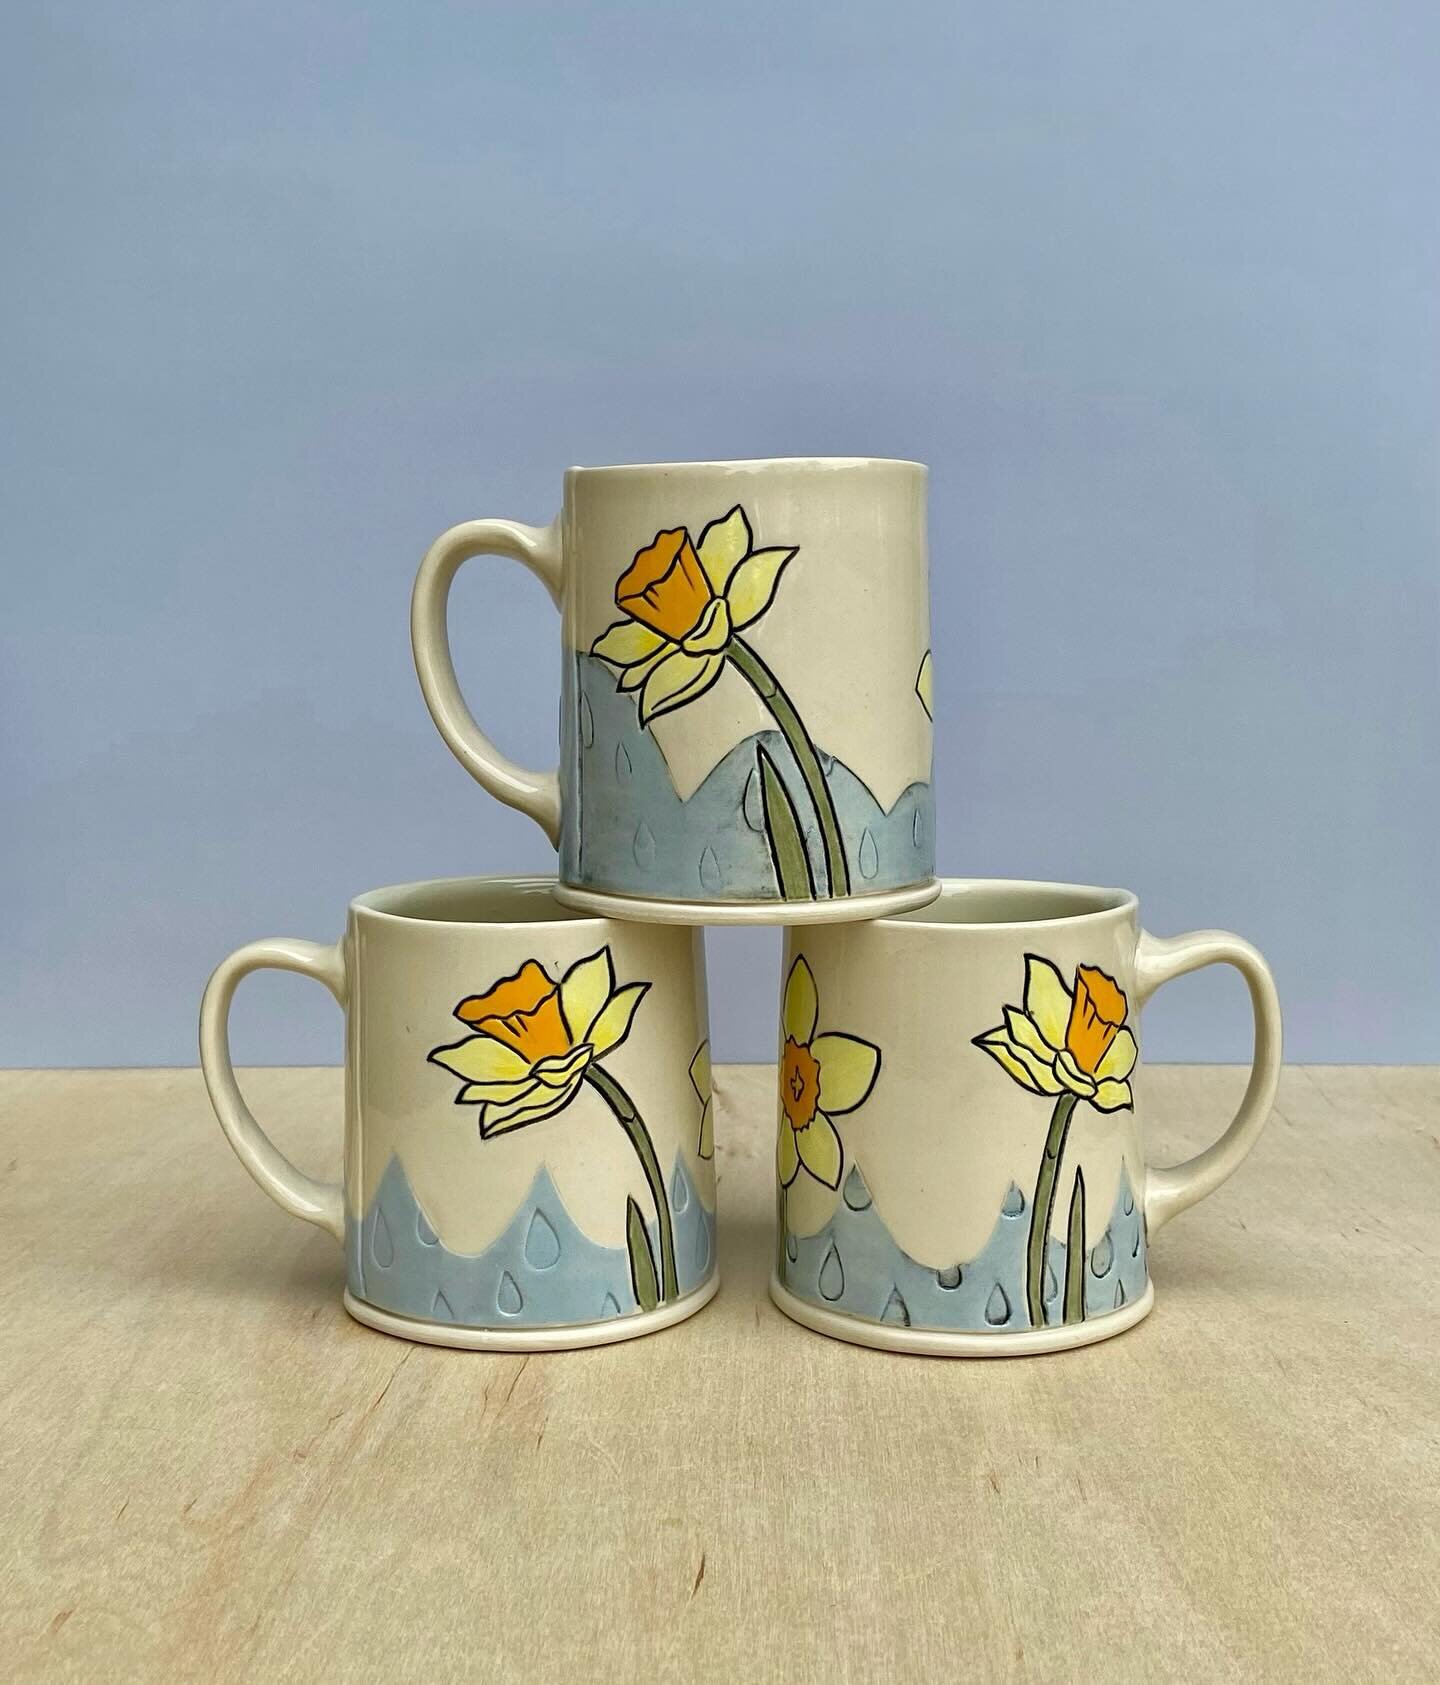 These daffodil mugs are available @shopcheekwood now! I&rsquo;m so excited to have work in such a lovely place. All my visits to Cheekwood have been wonderful and I highly recommend visiting when you can. 
.
.
.
.
.
.
.
.
#shoplocal #handmade #handma